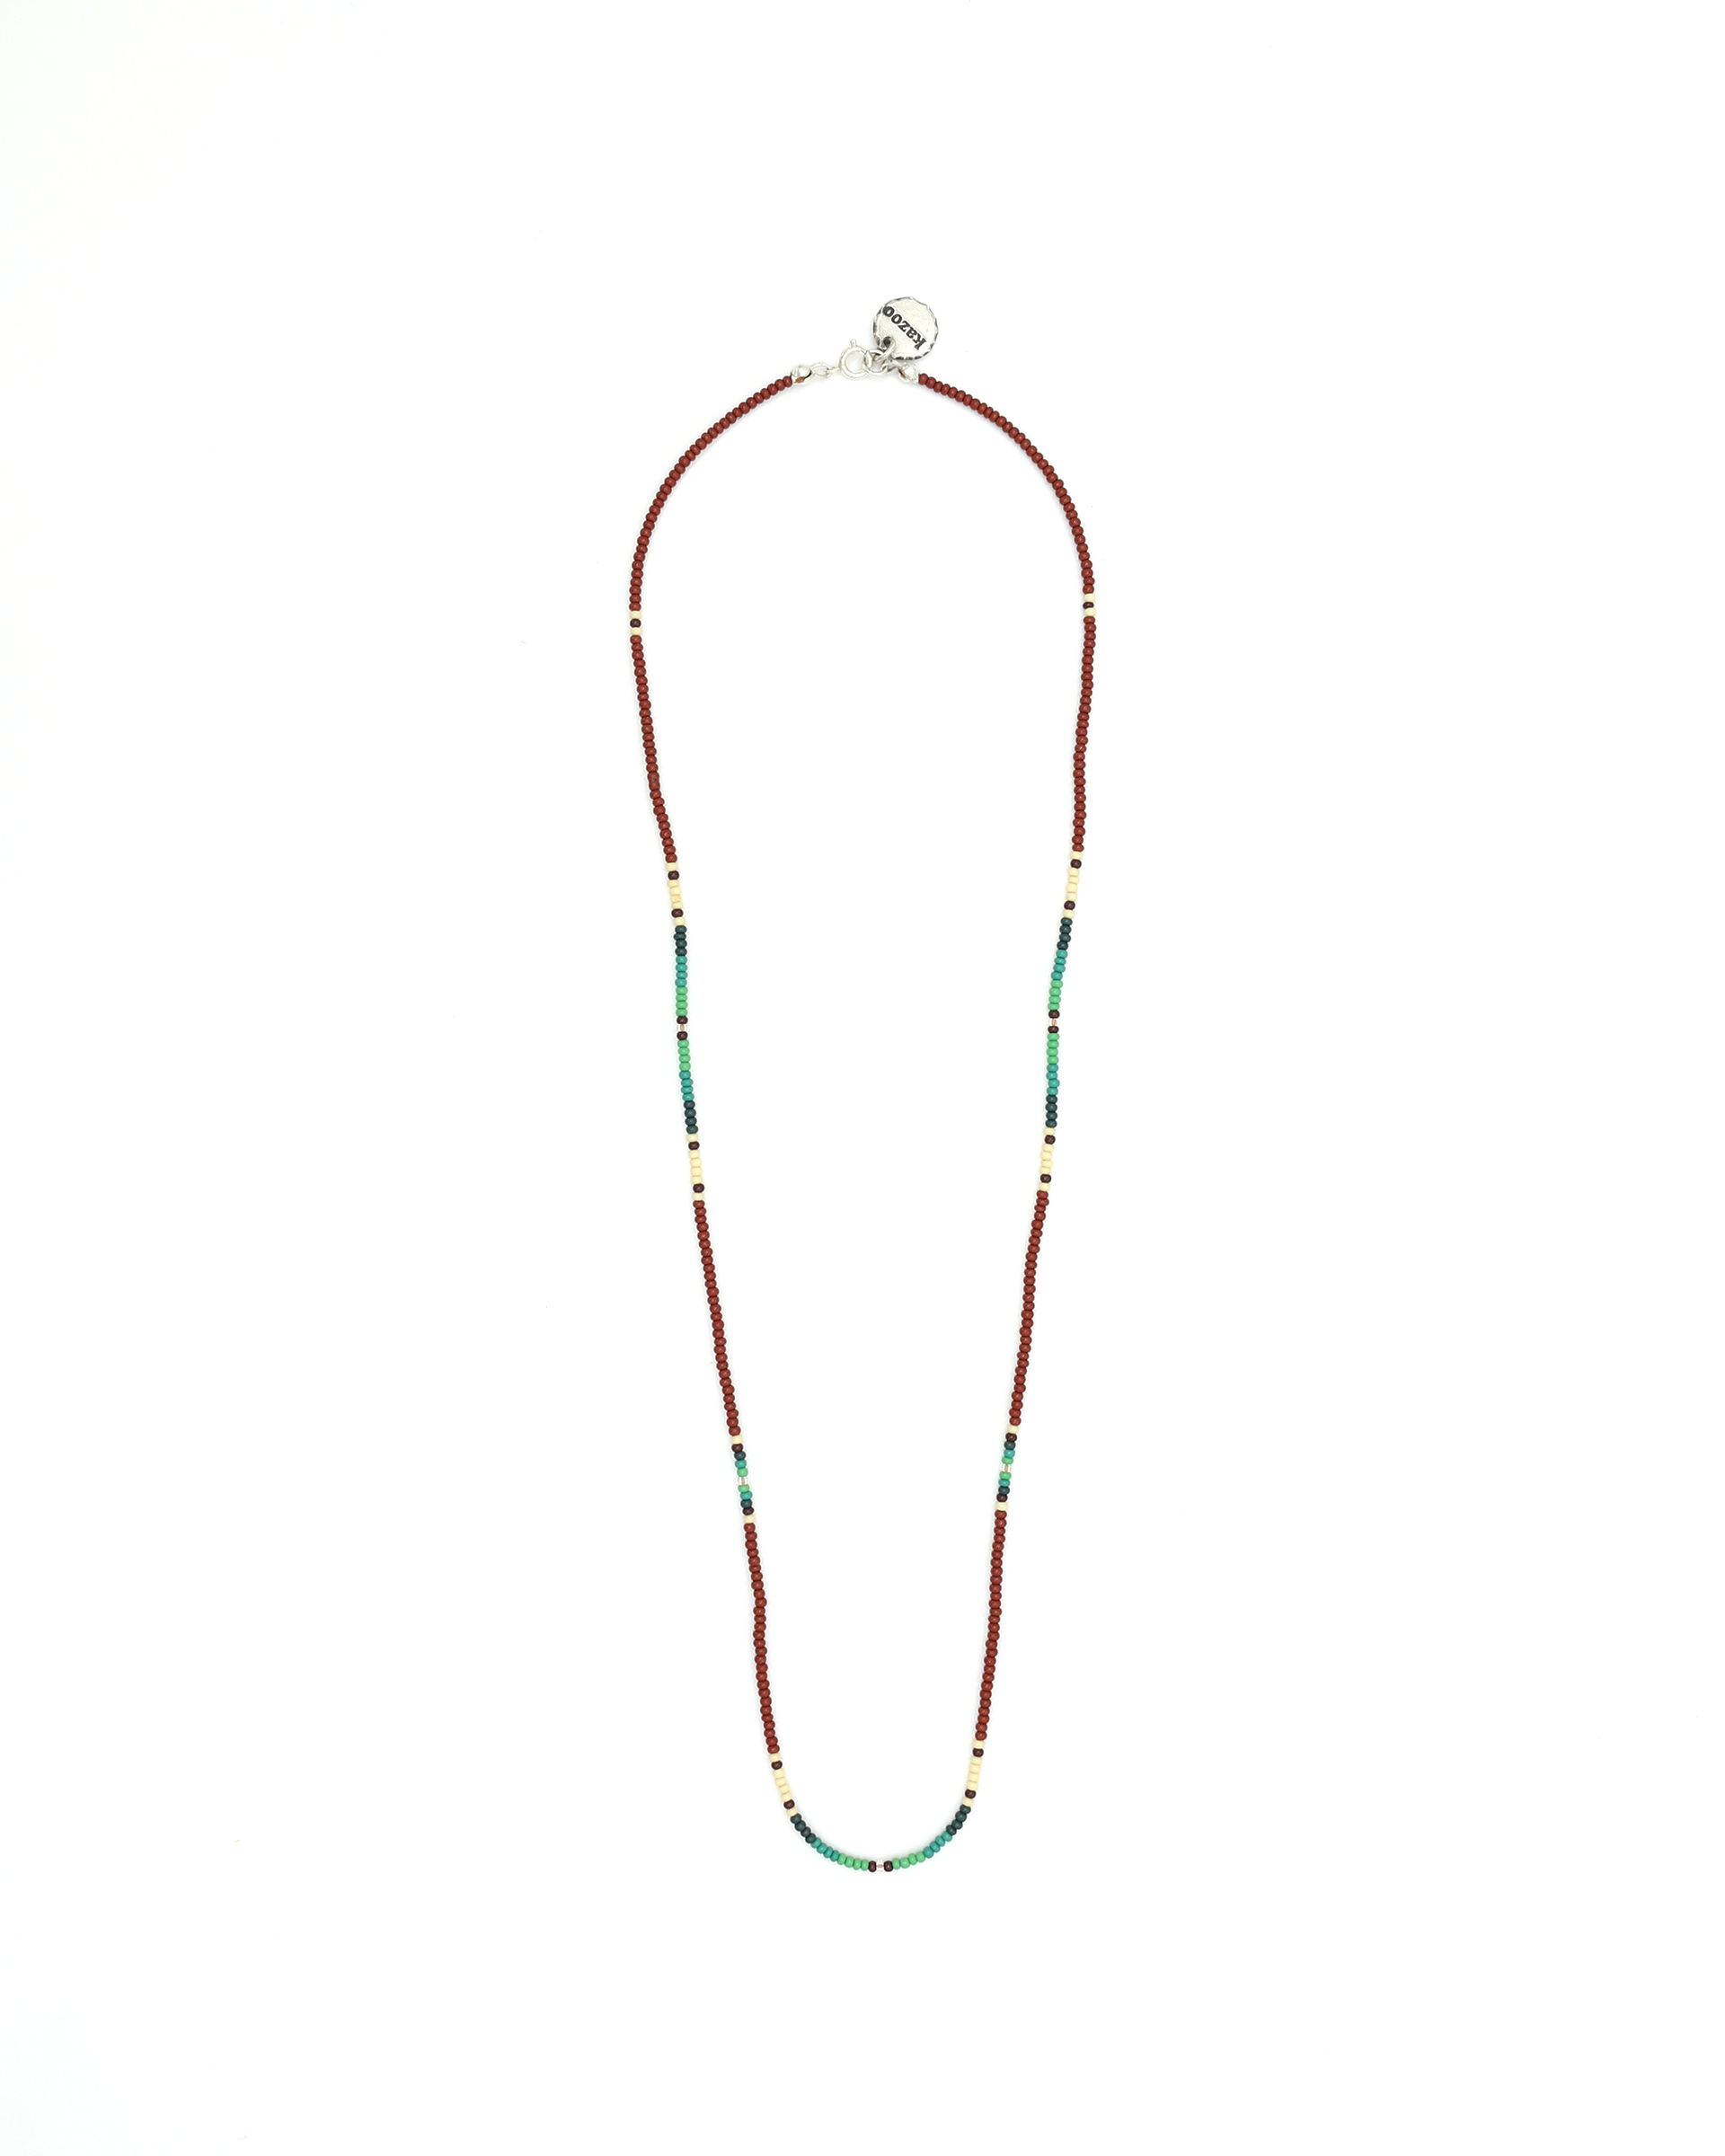 GREEN - MAROON / BEADS NECKLACE